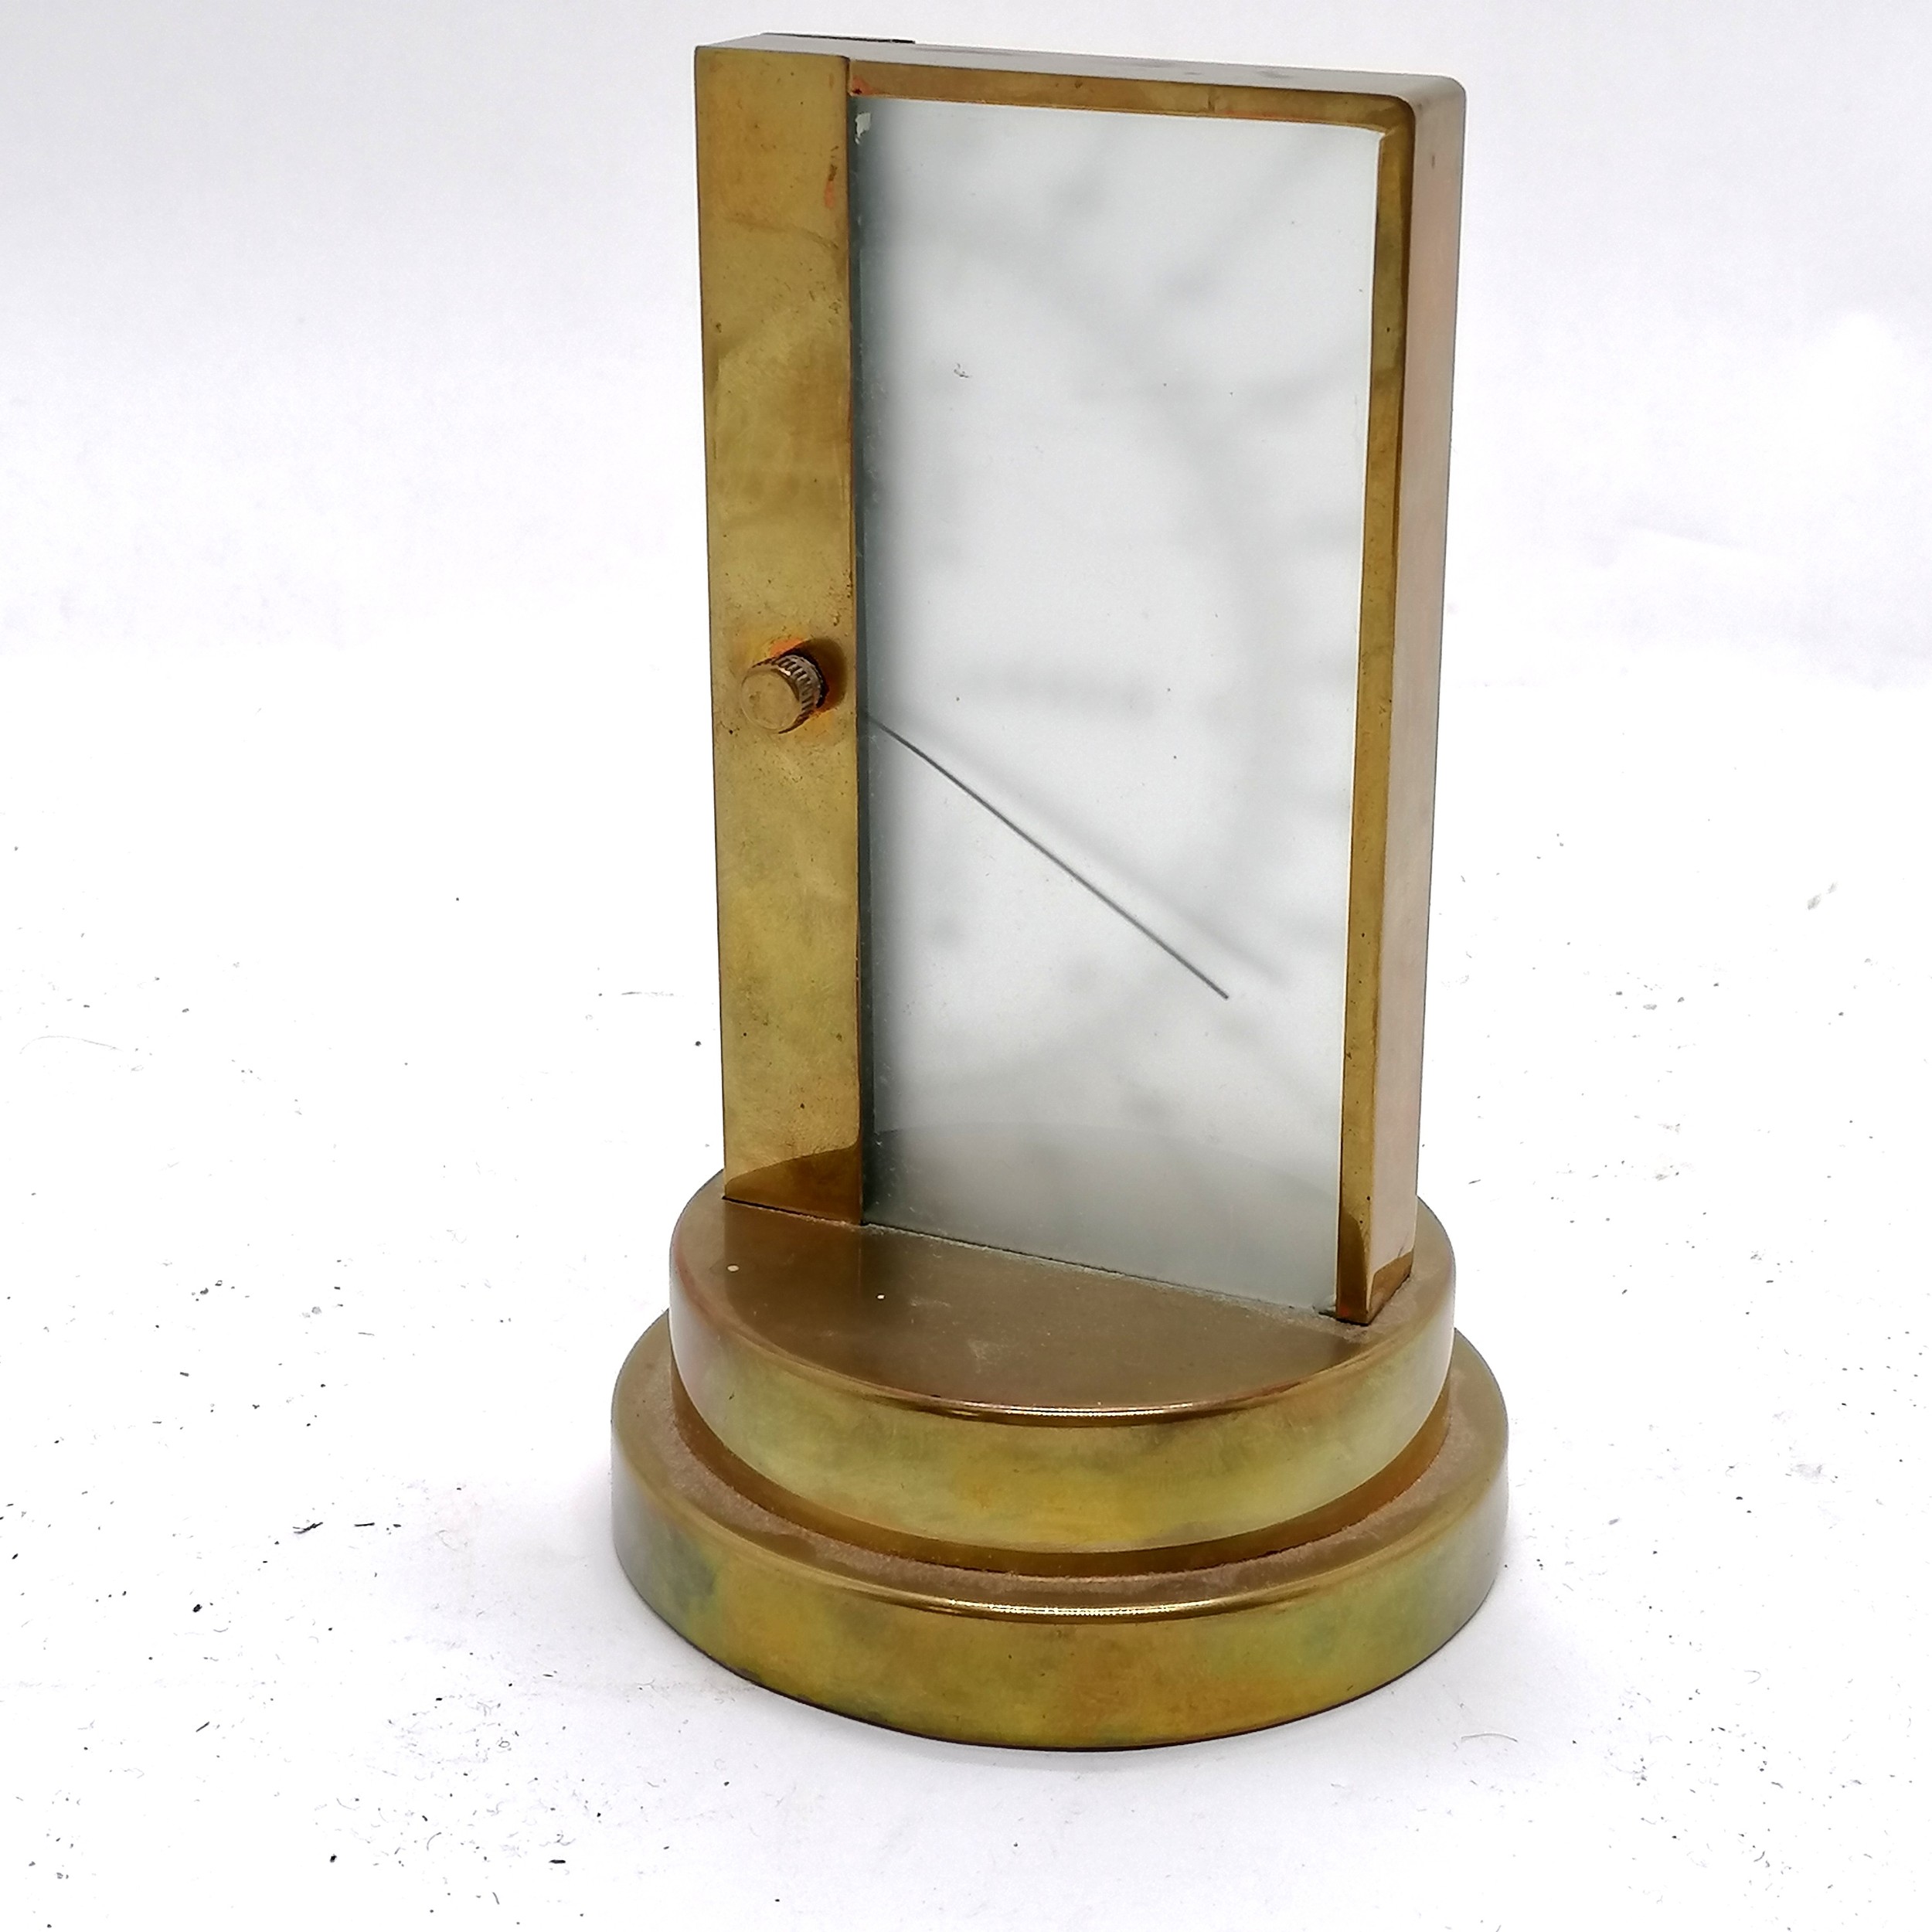 Unusual Zeiss Ikon Art Deco table barometer in a brass case, instructions and dated to base 26/09/ - Image 4 of 4